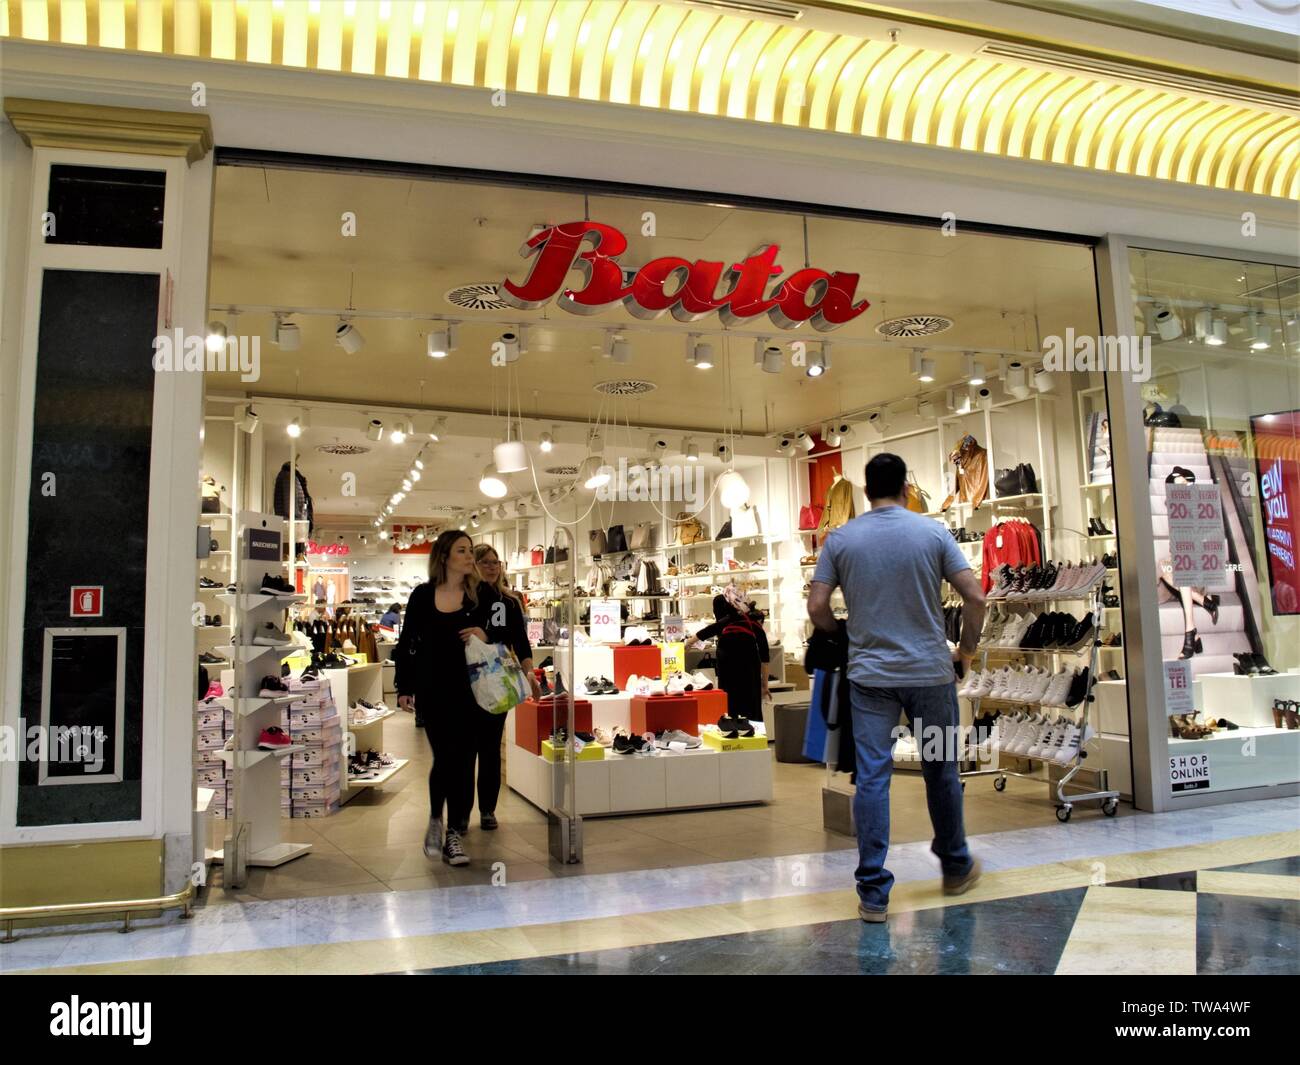 BATA SHOES FASHION STORE ENTRANCE IN EUROMA 2 SHOPPING CENTER IN ROME Stock Photo